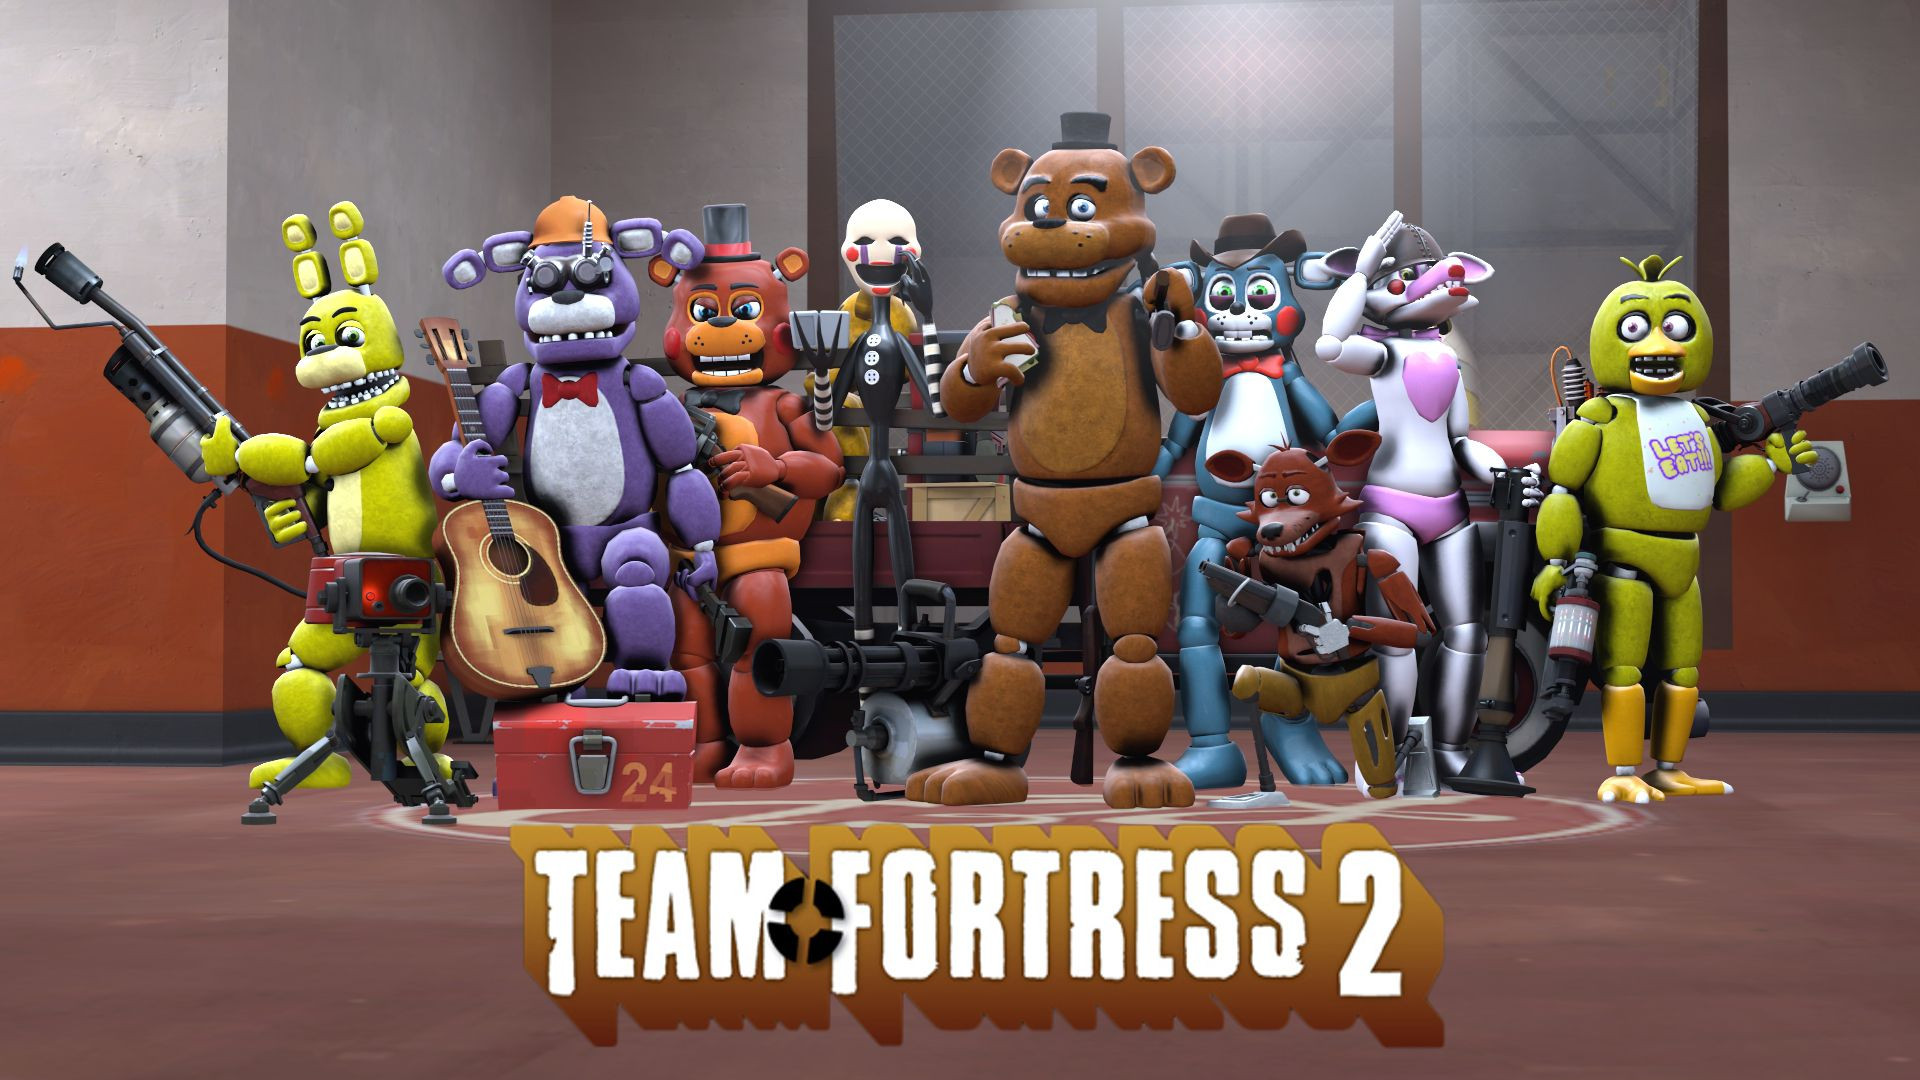 Team Fortress 2 Birthday Party Ideas
 FNAF and TF2 Crossover by TalonDang on DeviantArt